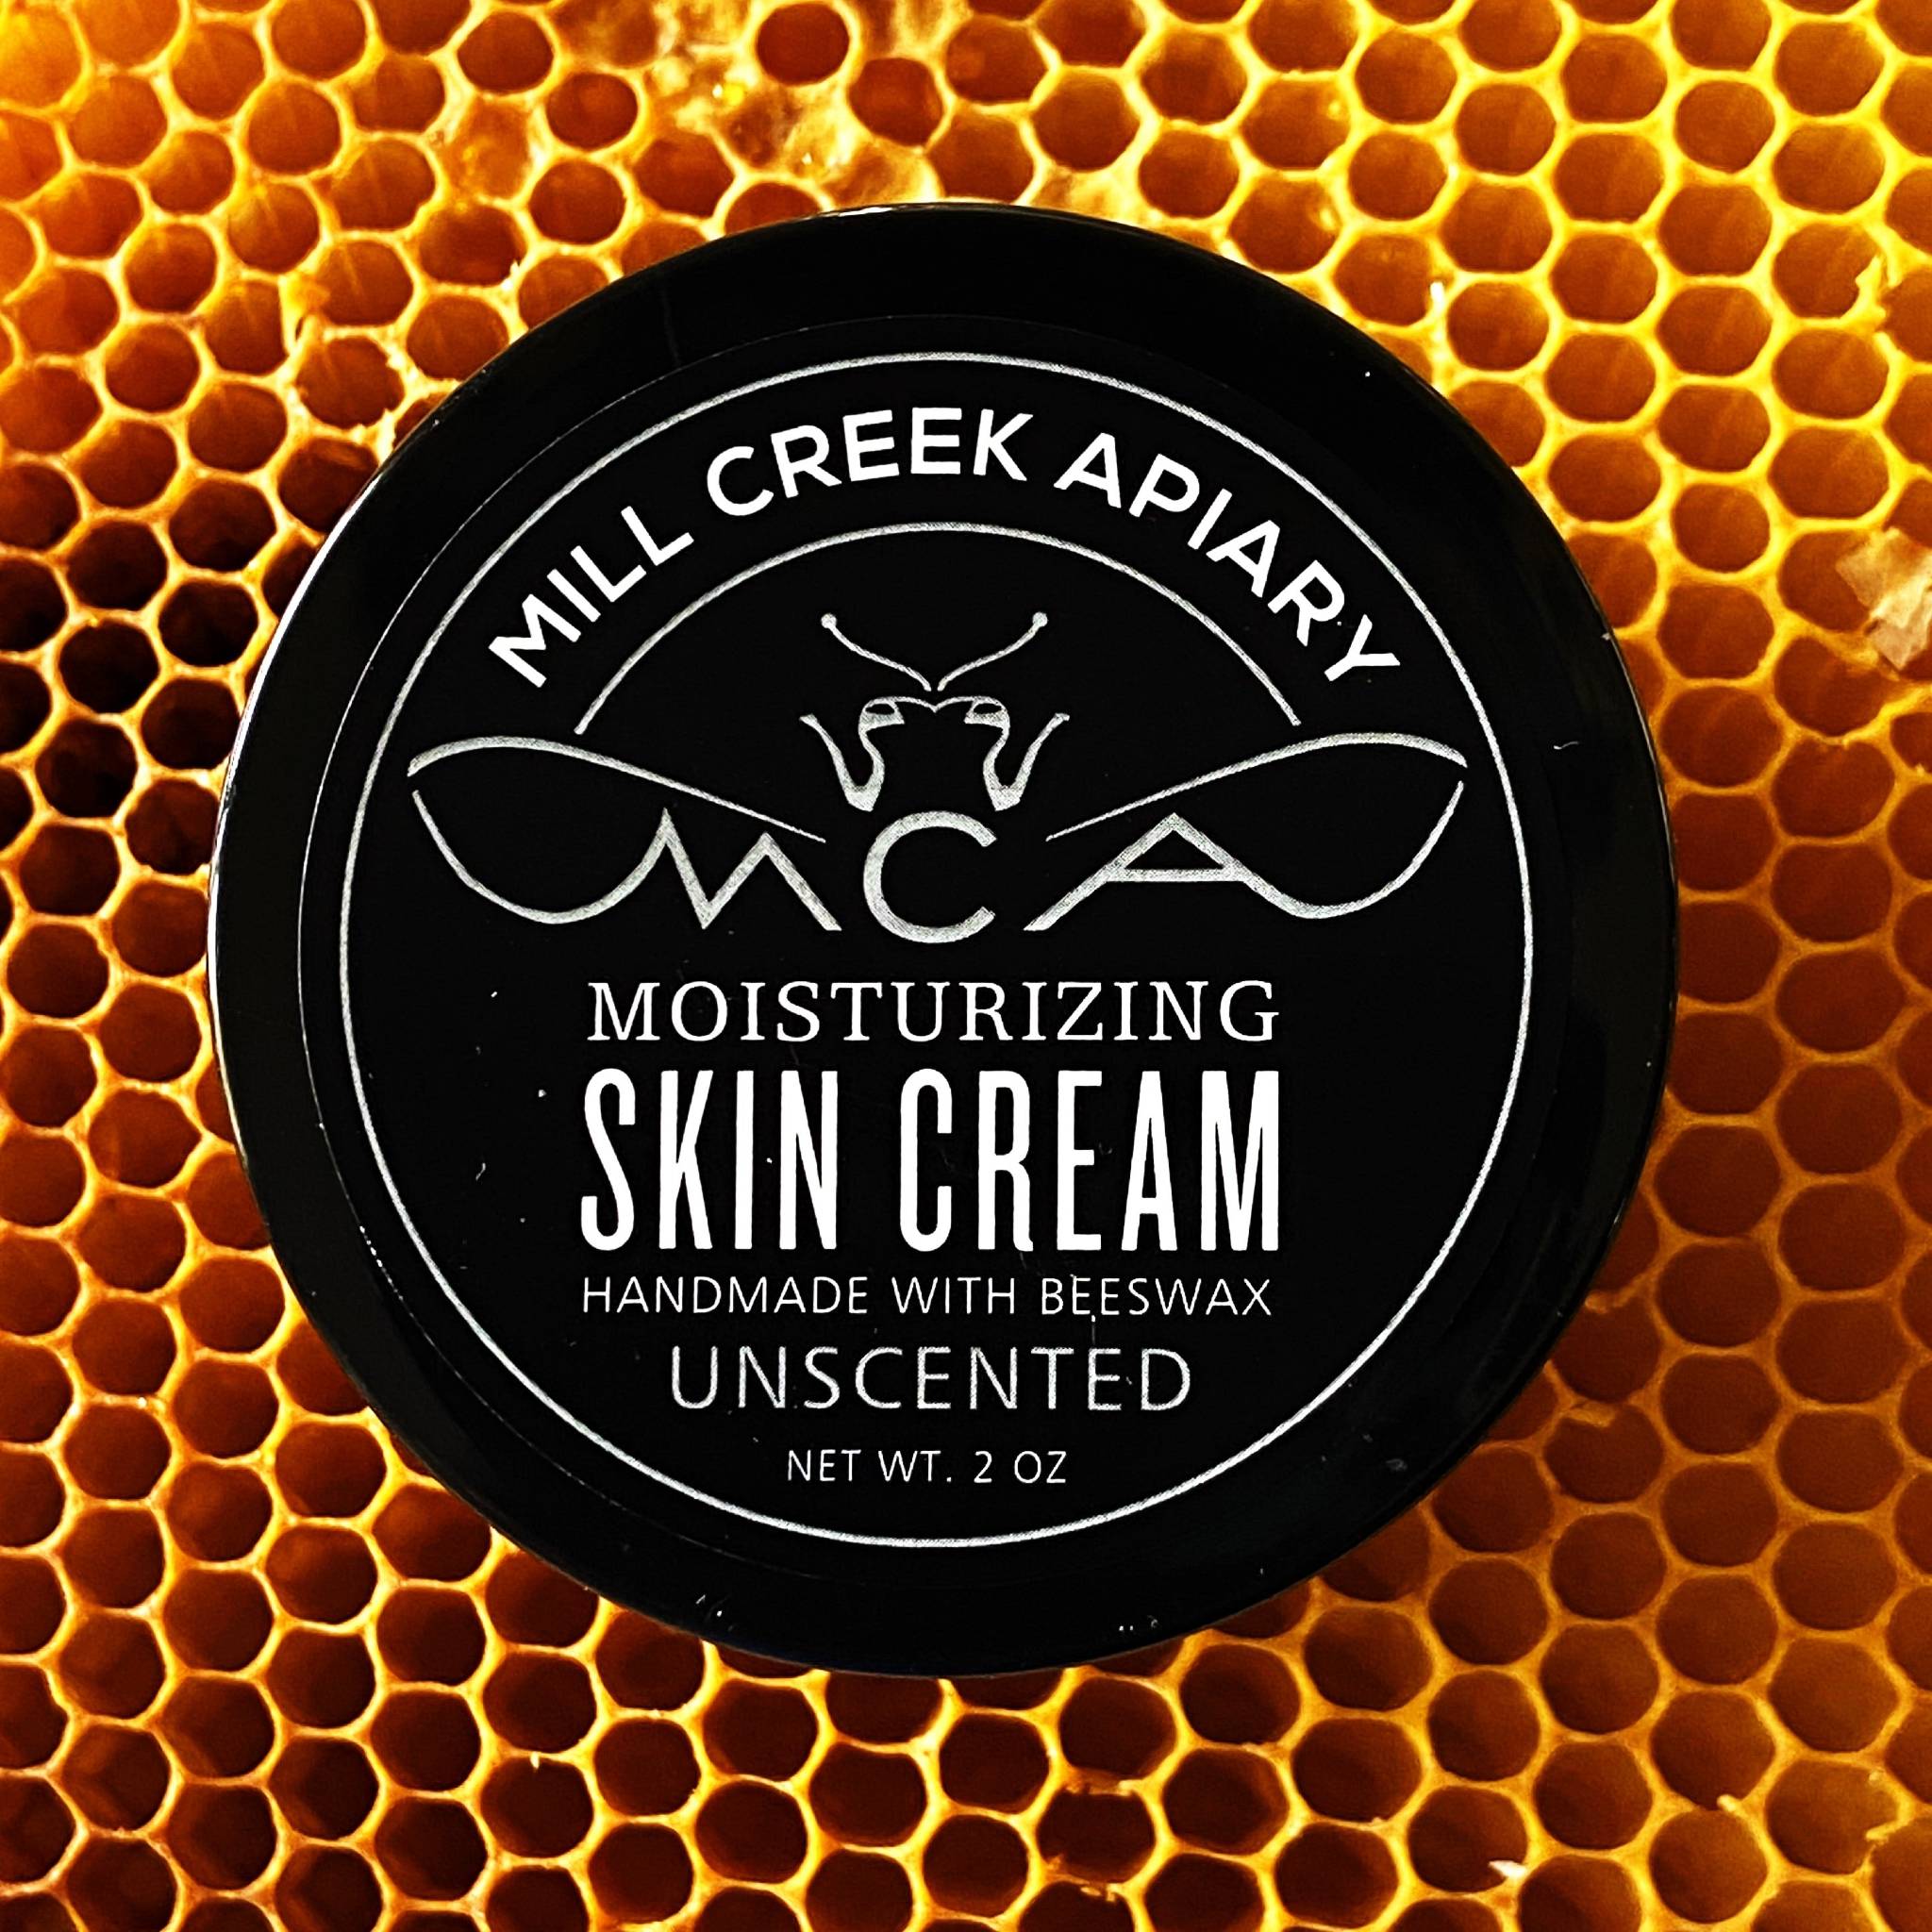 Mill Creek Apiary unscented beeswax skin cream has only the gently sweet scent of beeswax